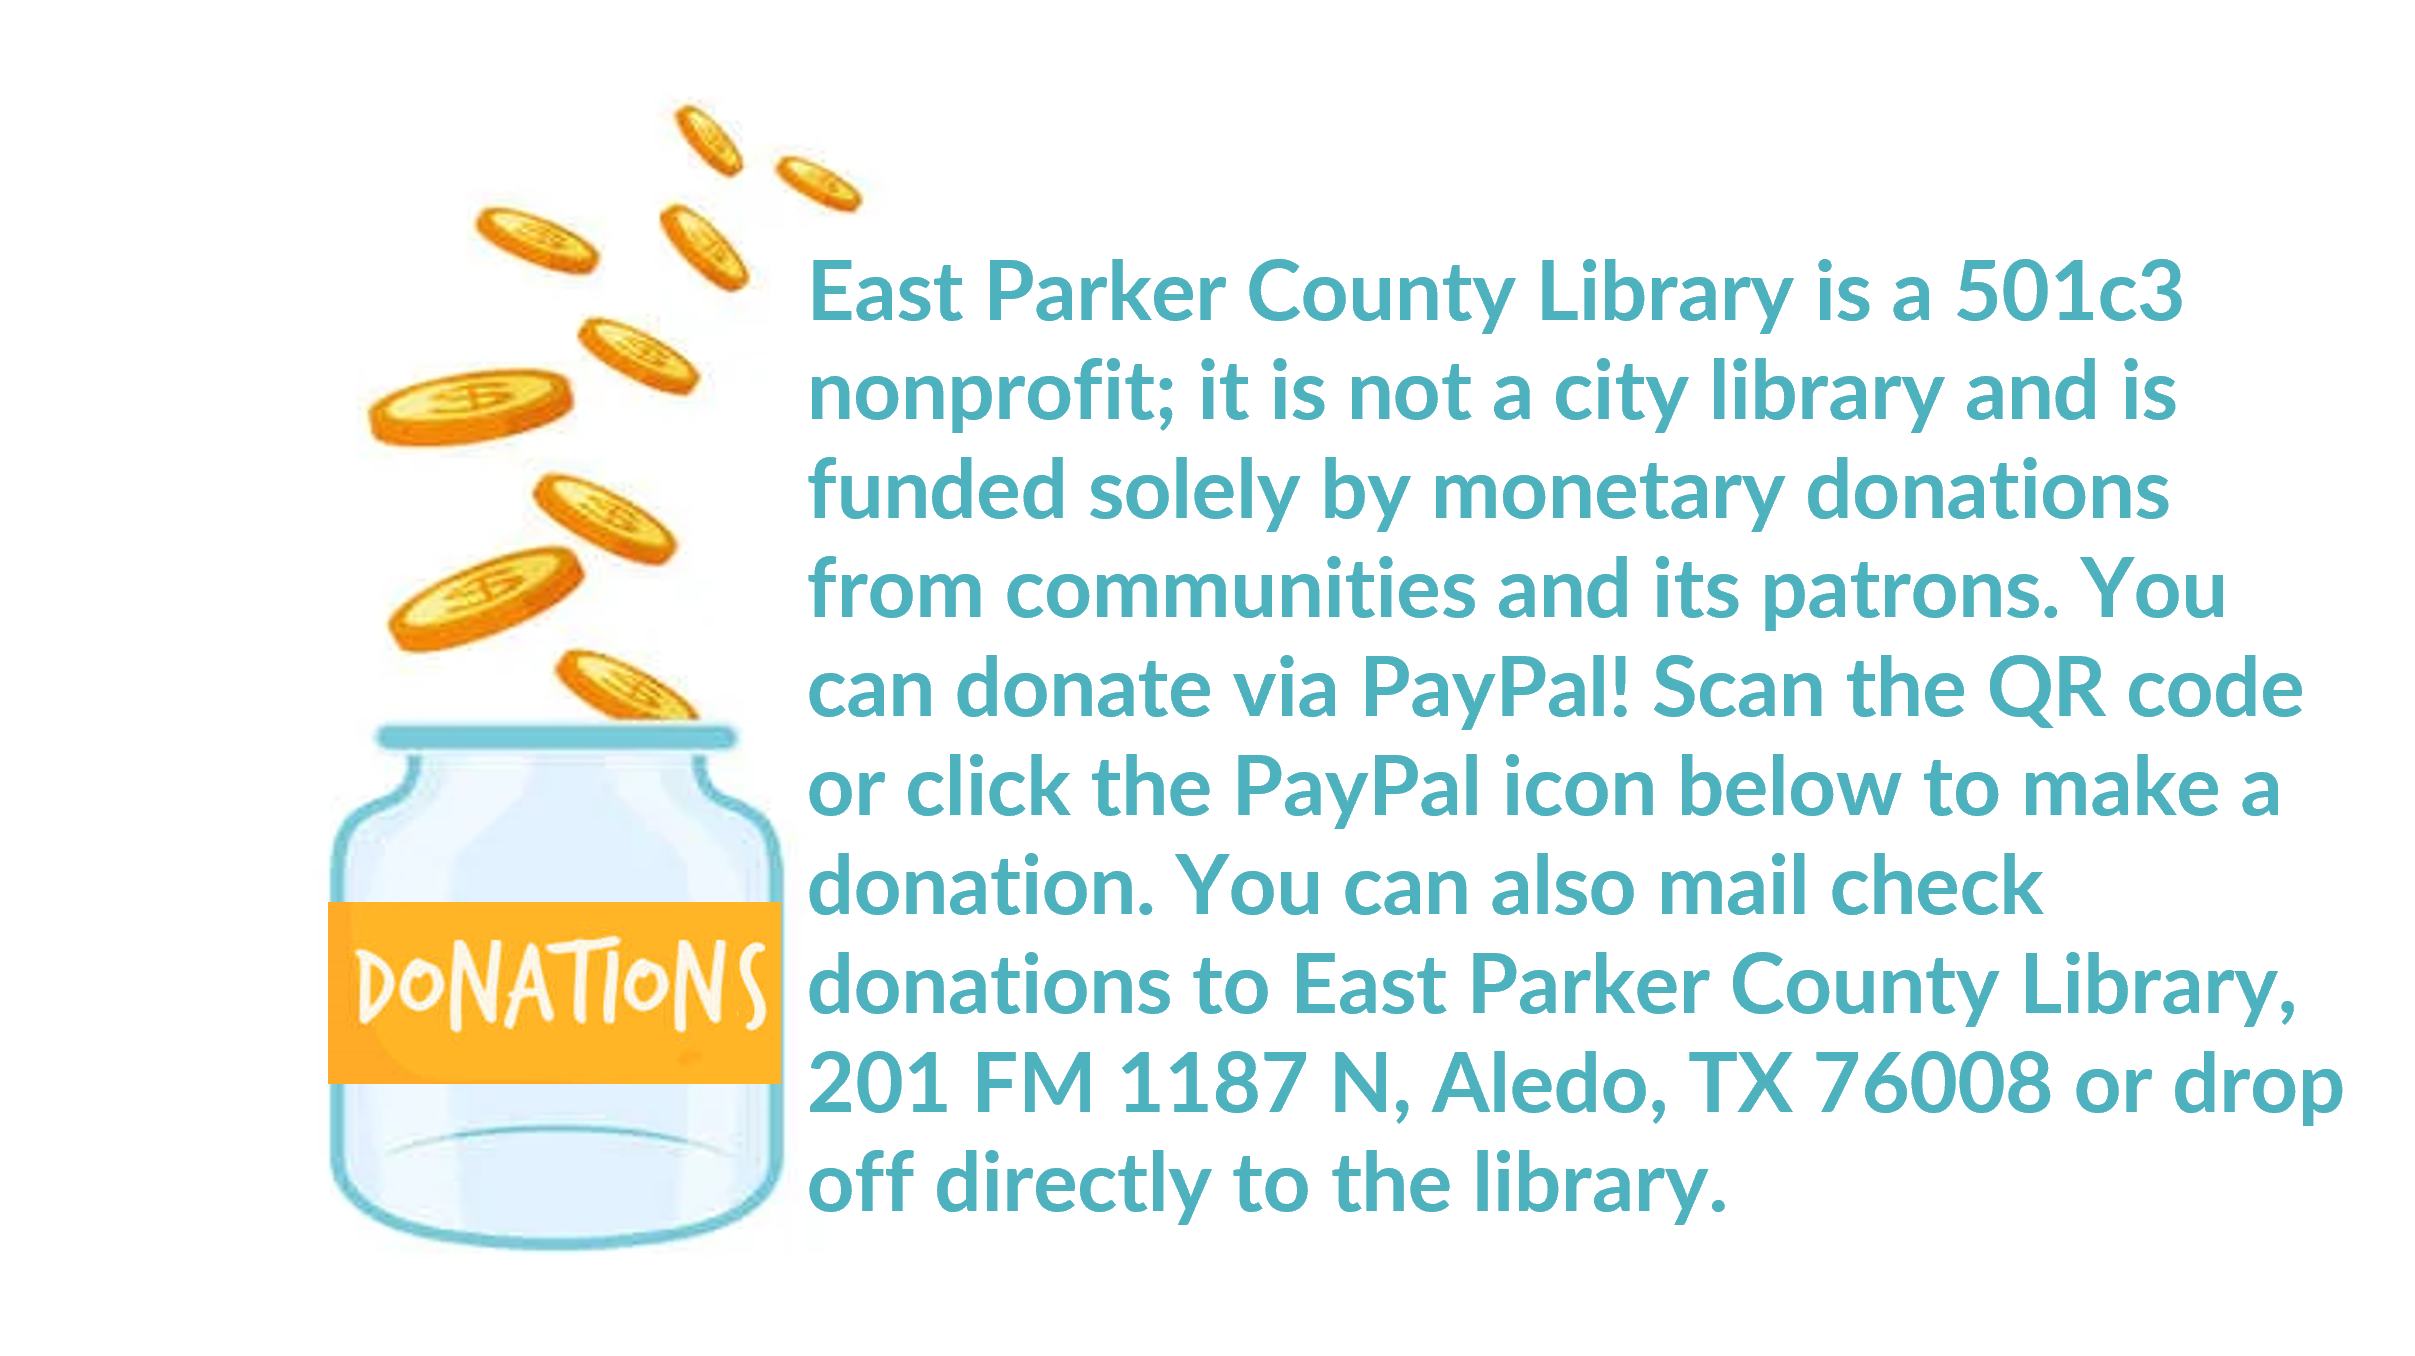 monetary donations request image for website.png